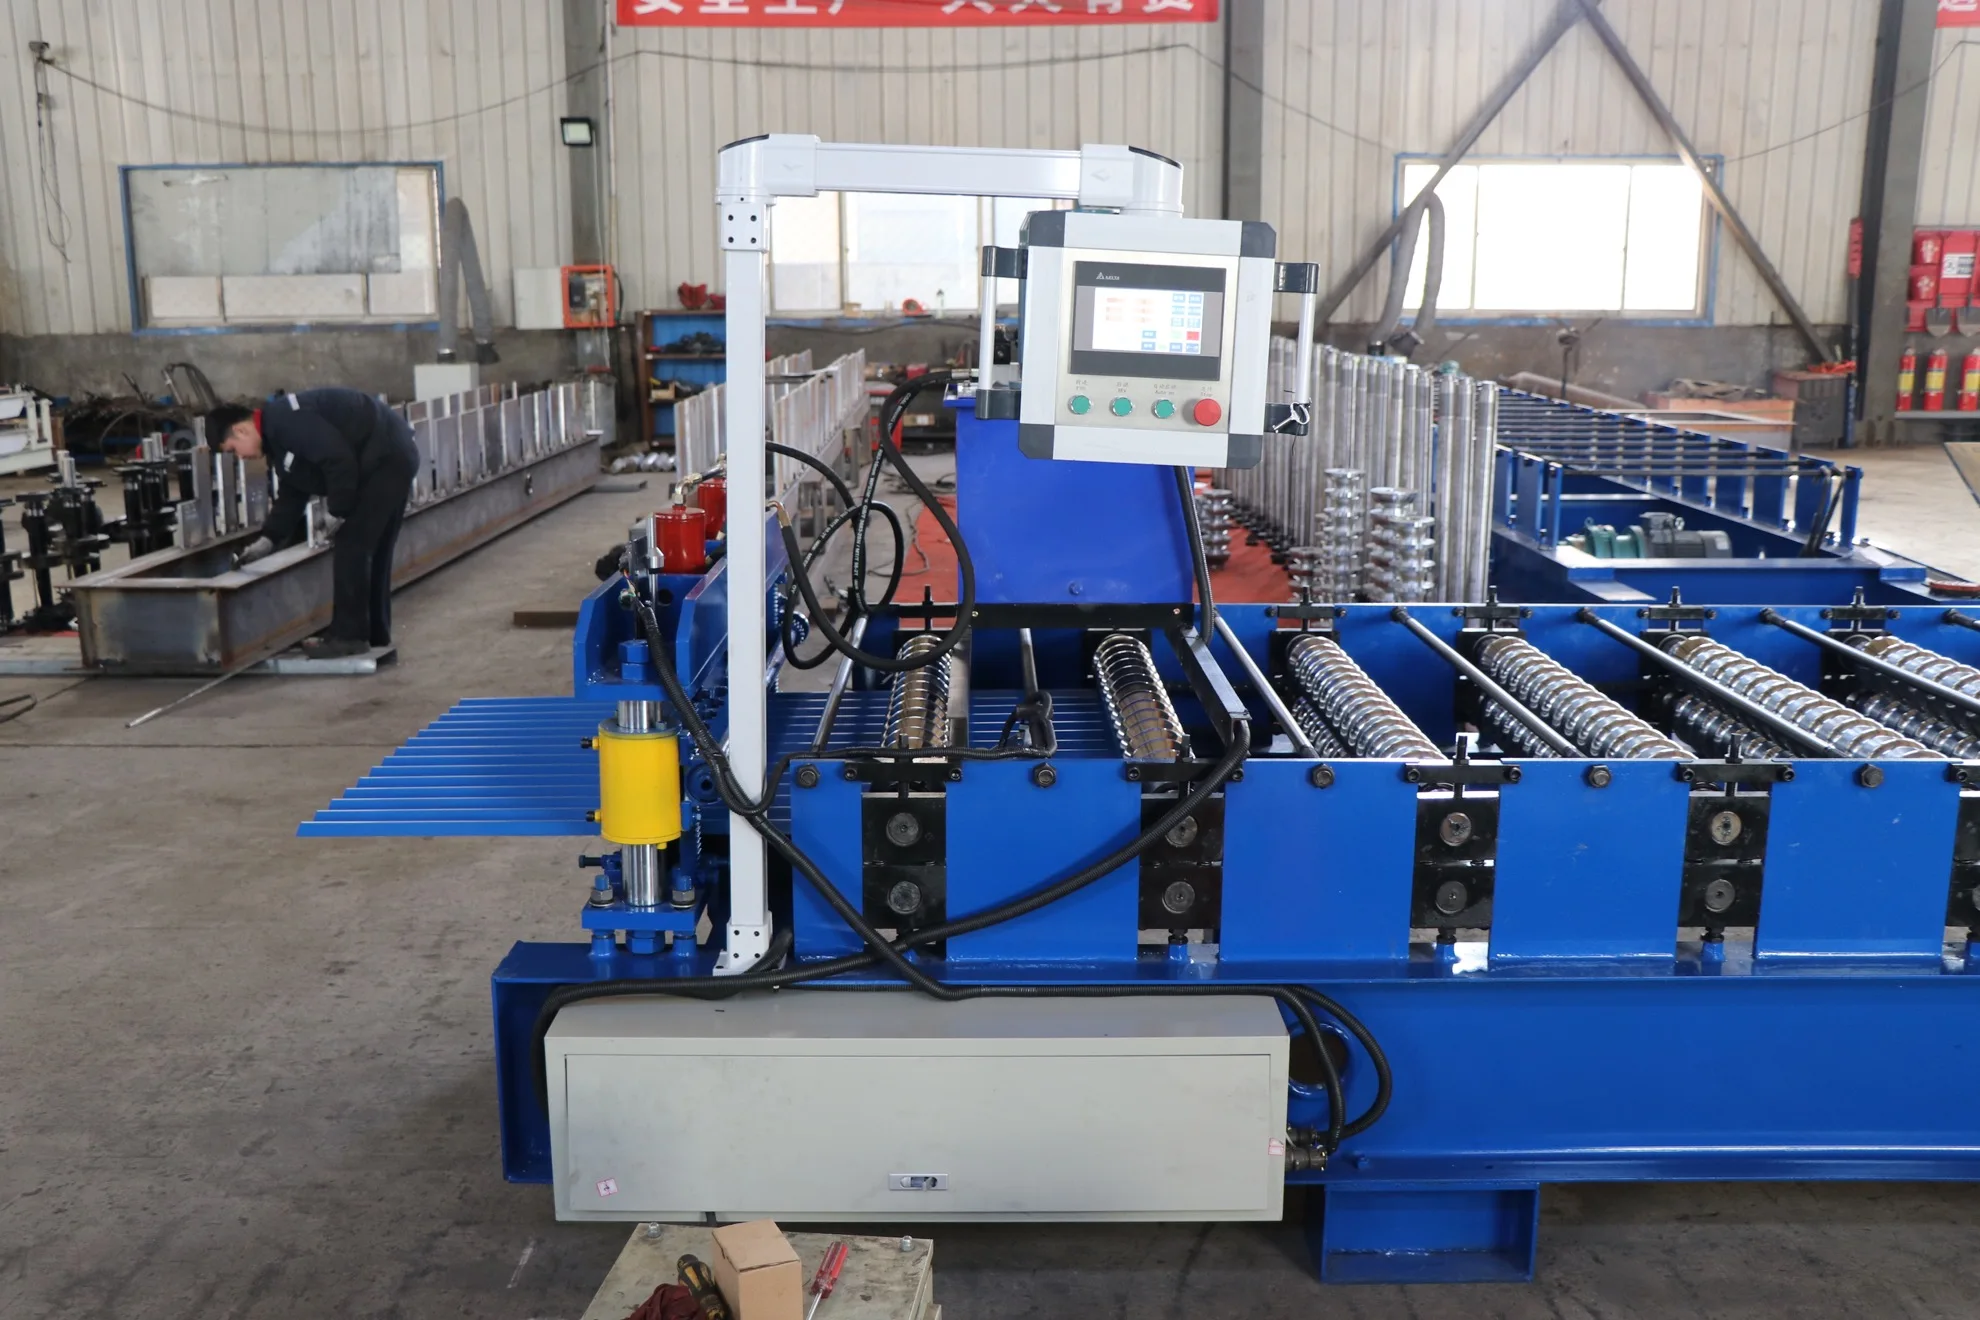 10% discount 850 model corrugated metal roof sheet roll forming machine in stock